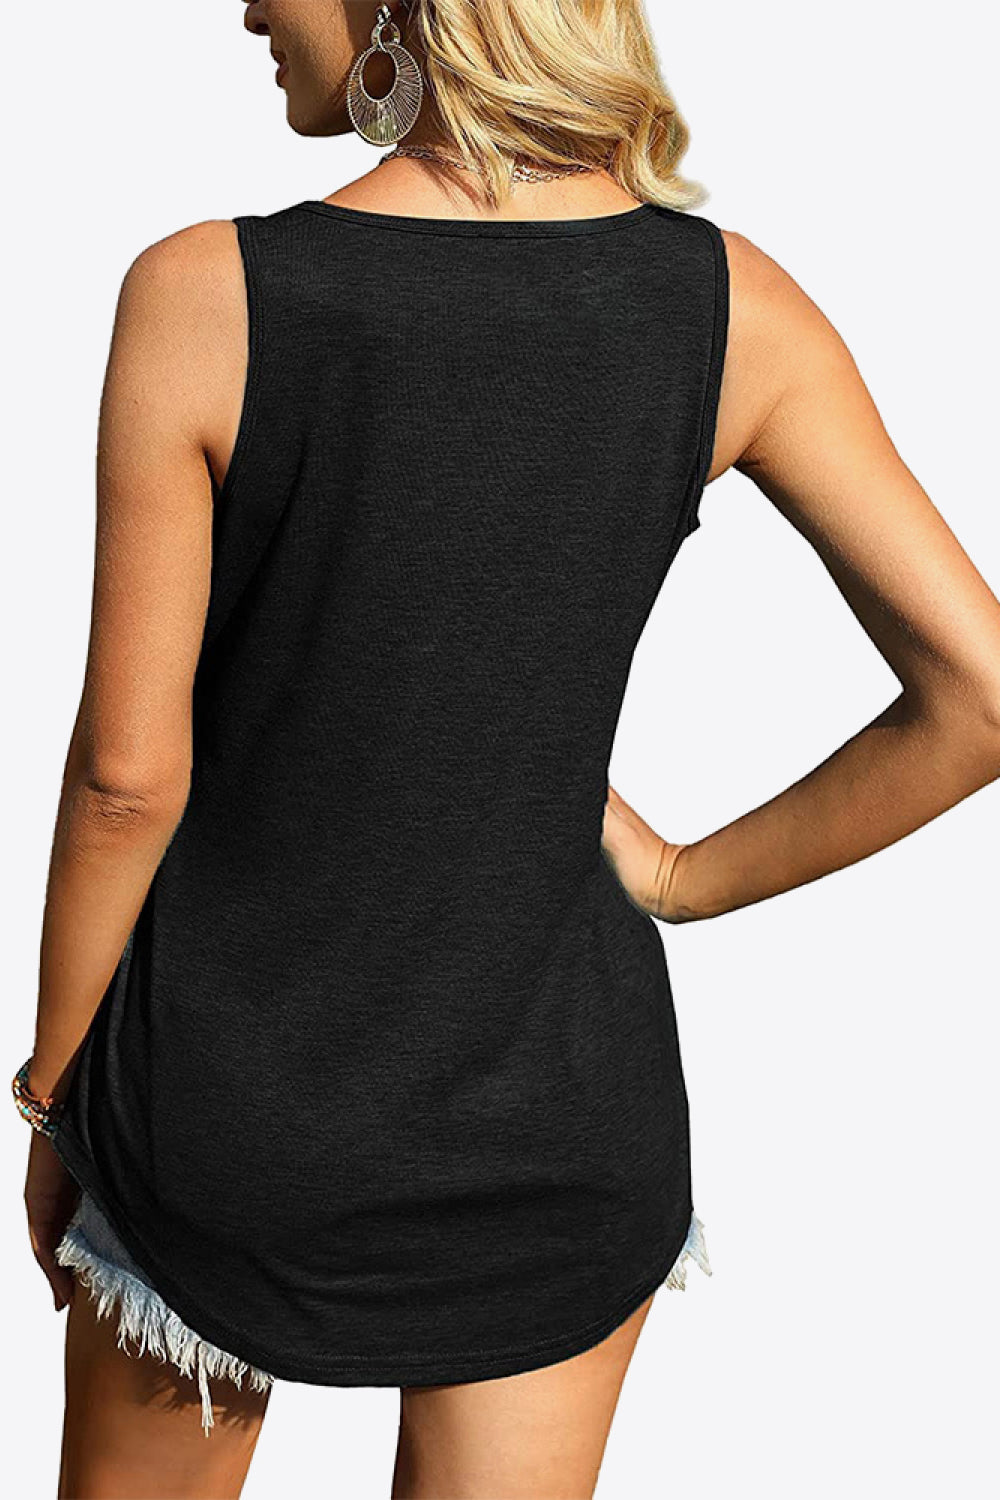 CHICbabe Full Size Curved Hem Square Neck Tank